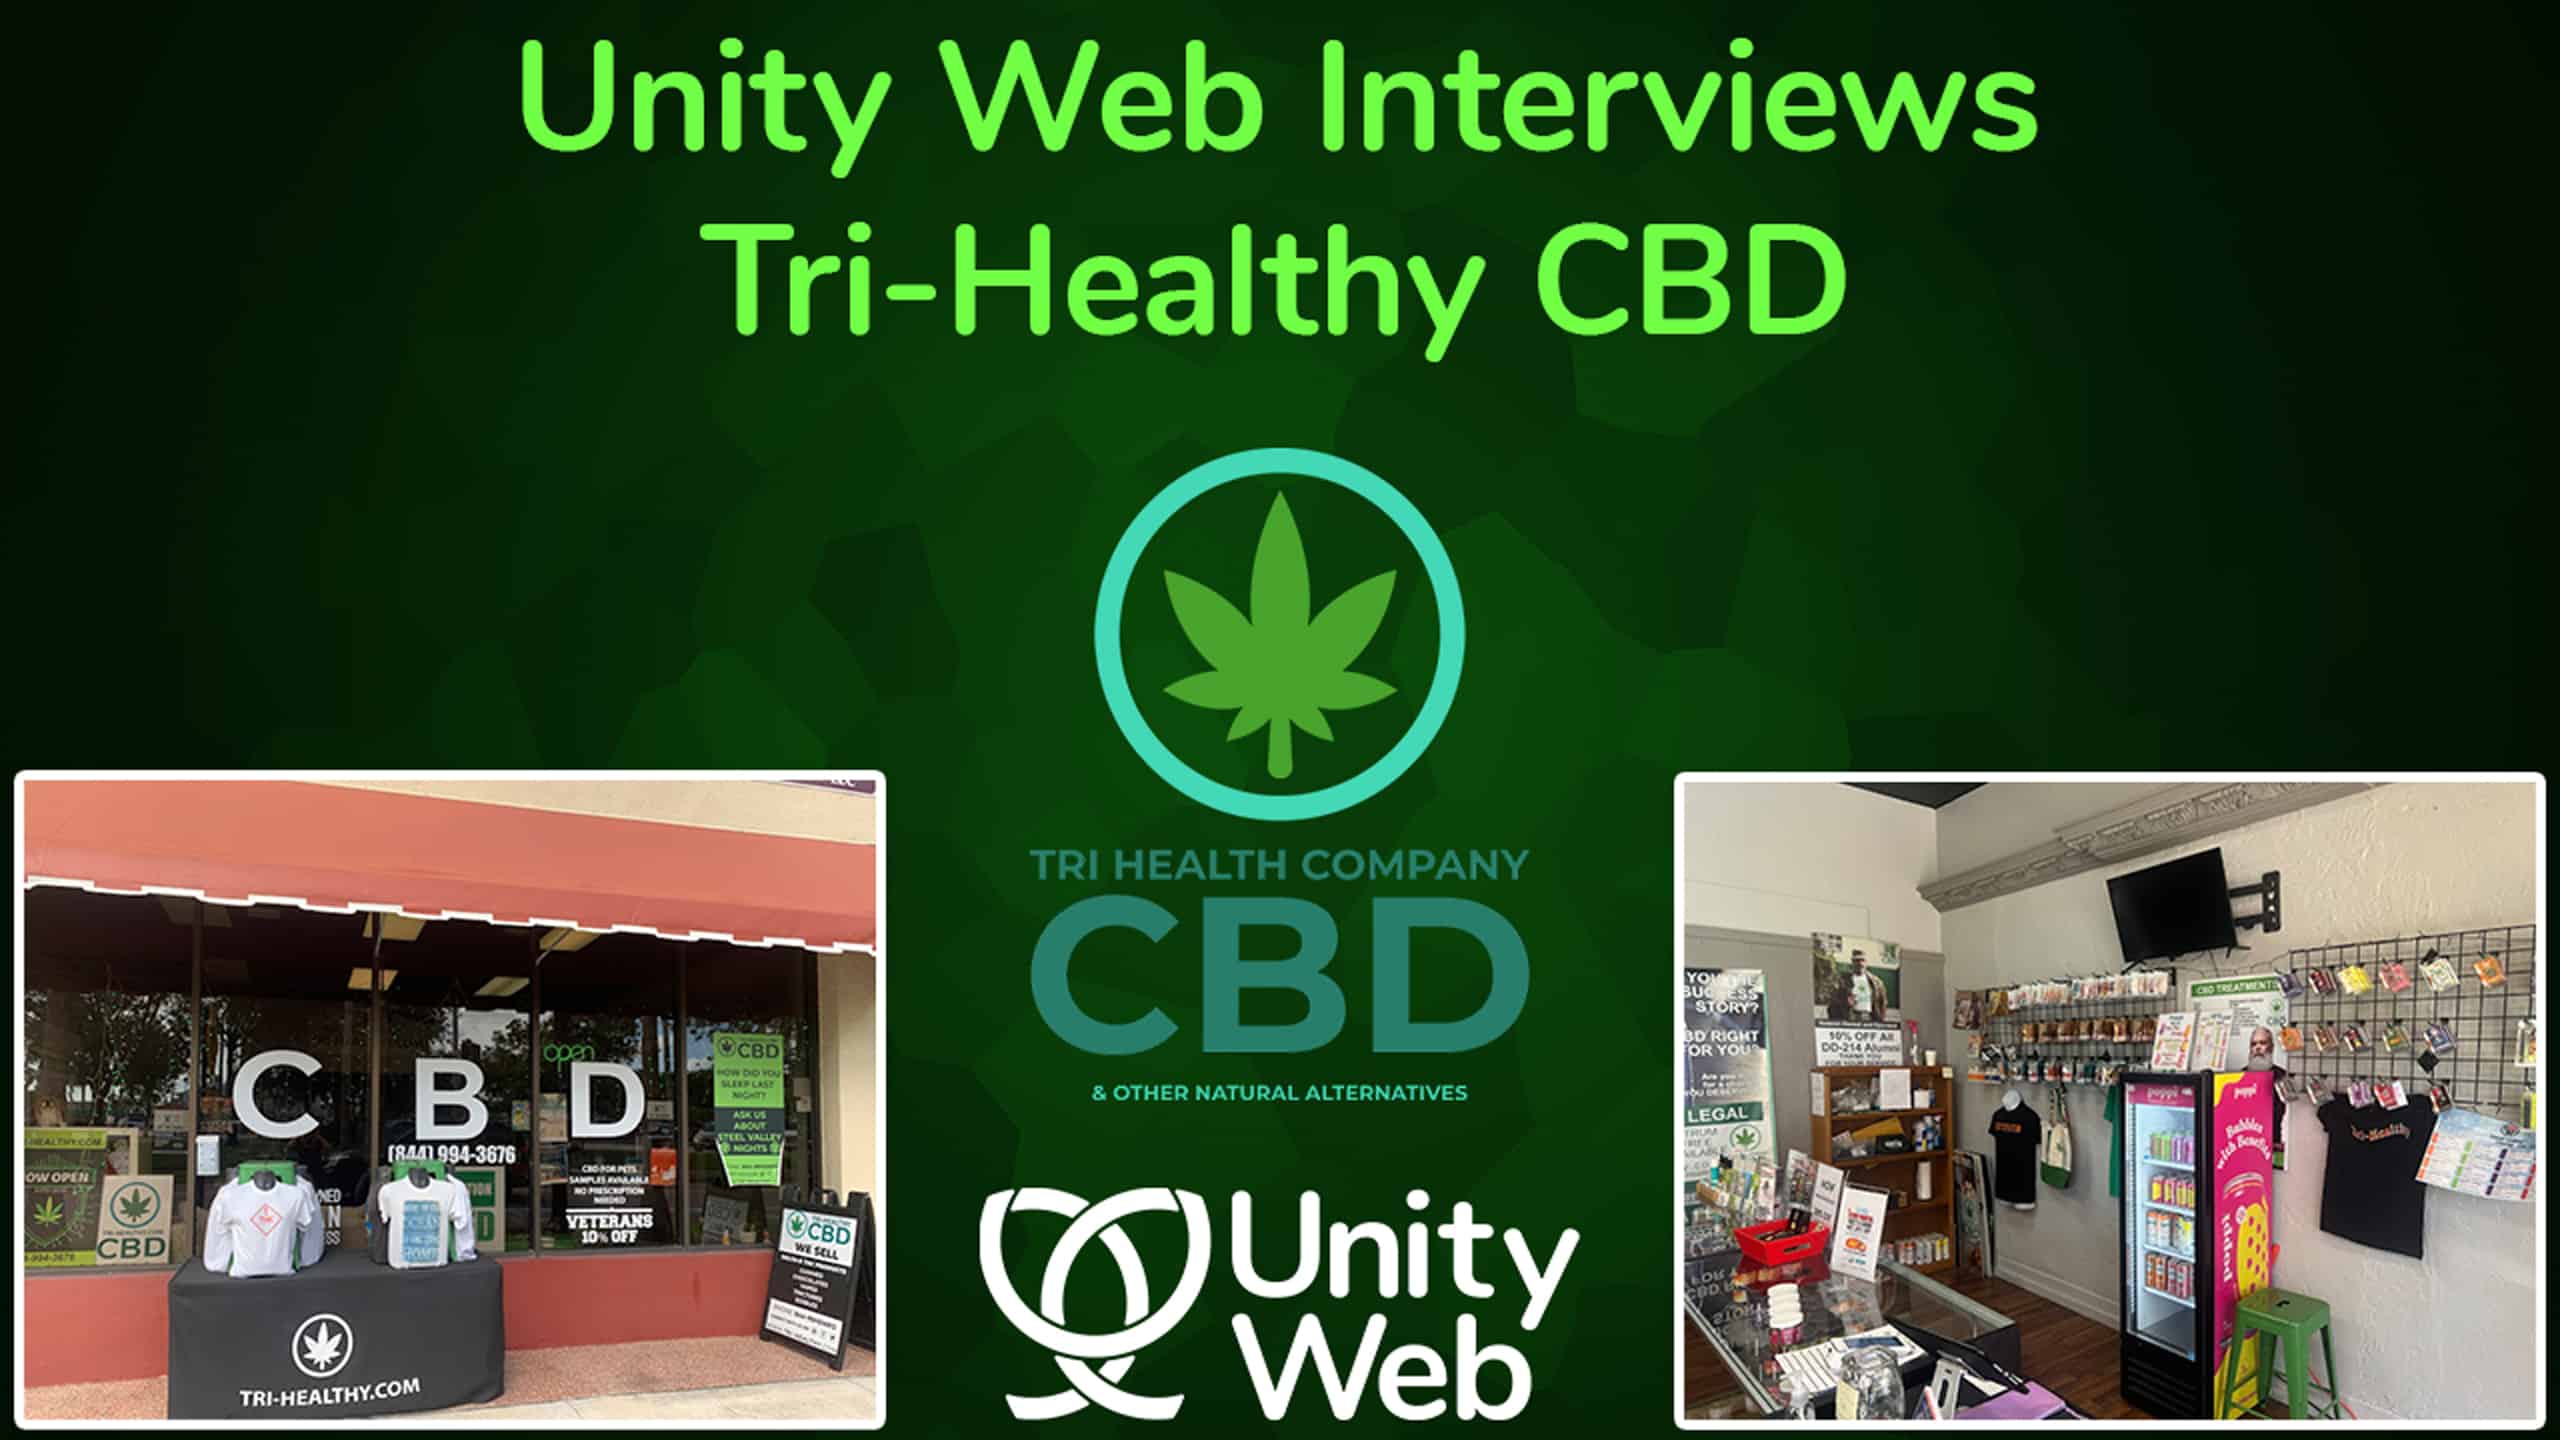 Unity Web Interviews with Tri-Healthy’s Paul Kauldy – Lessons From a Local CBD Leader